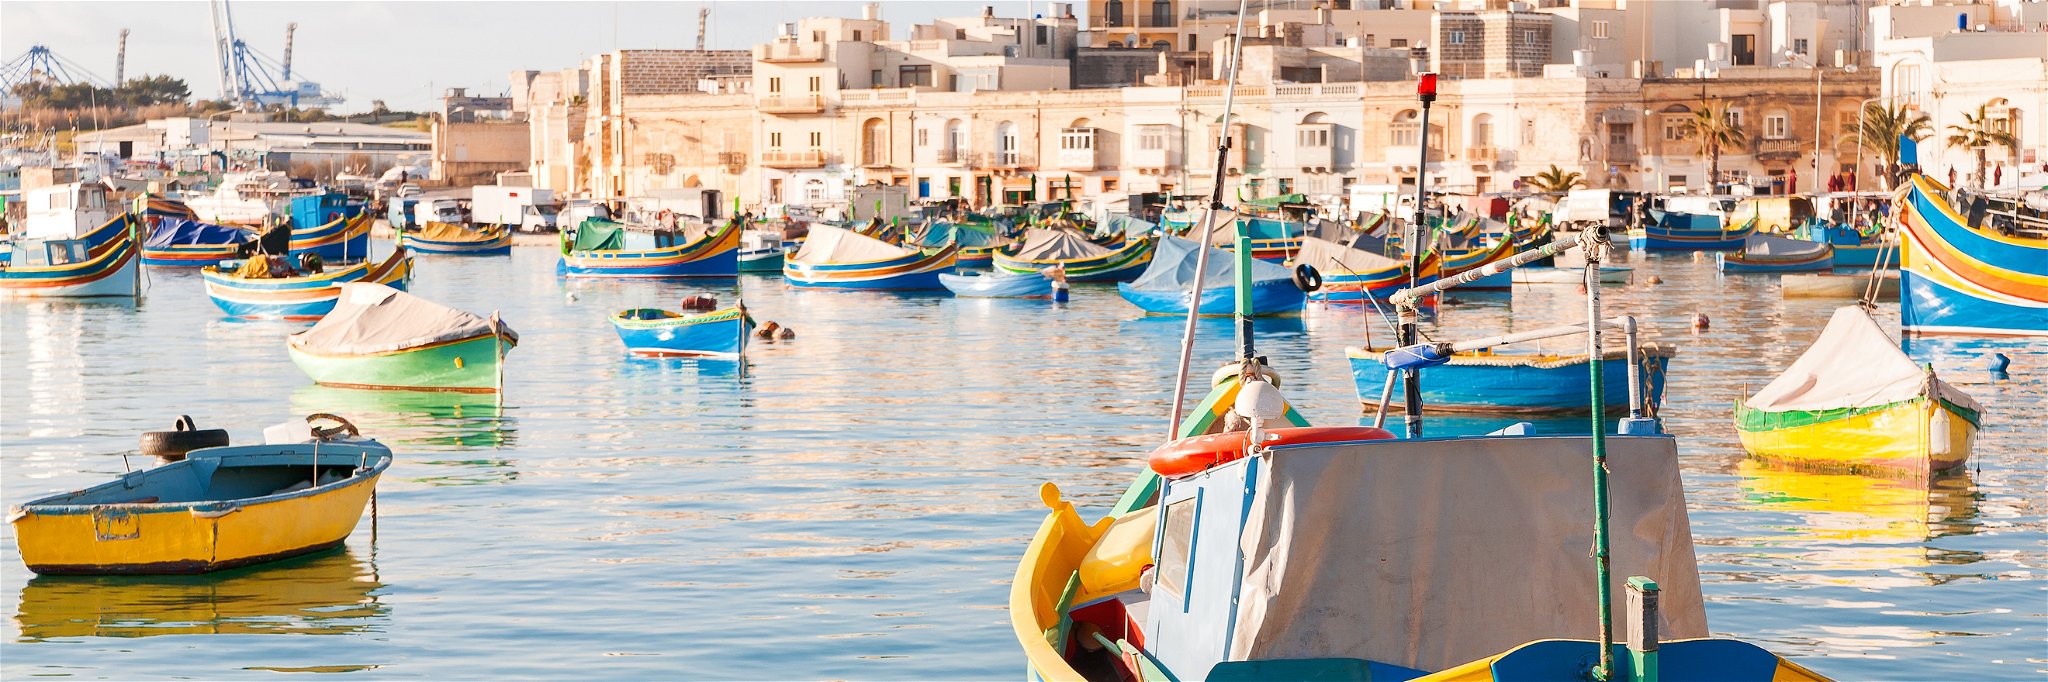 Malta Becomes the First EU Nation to Require Proof of Vaccination for Visitors